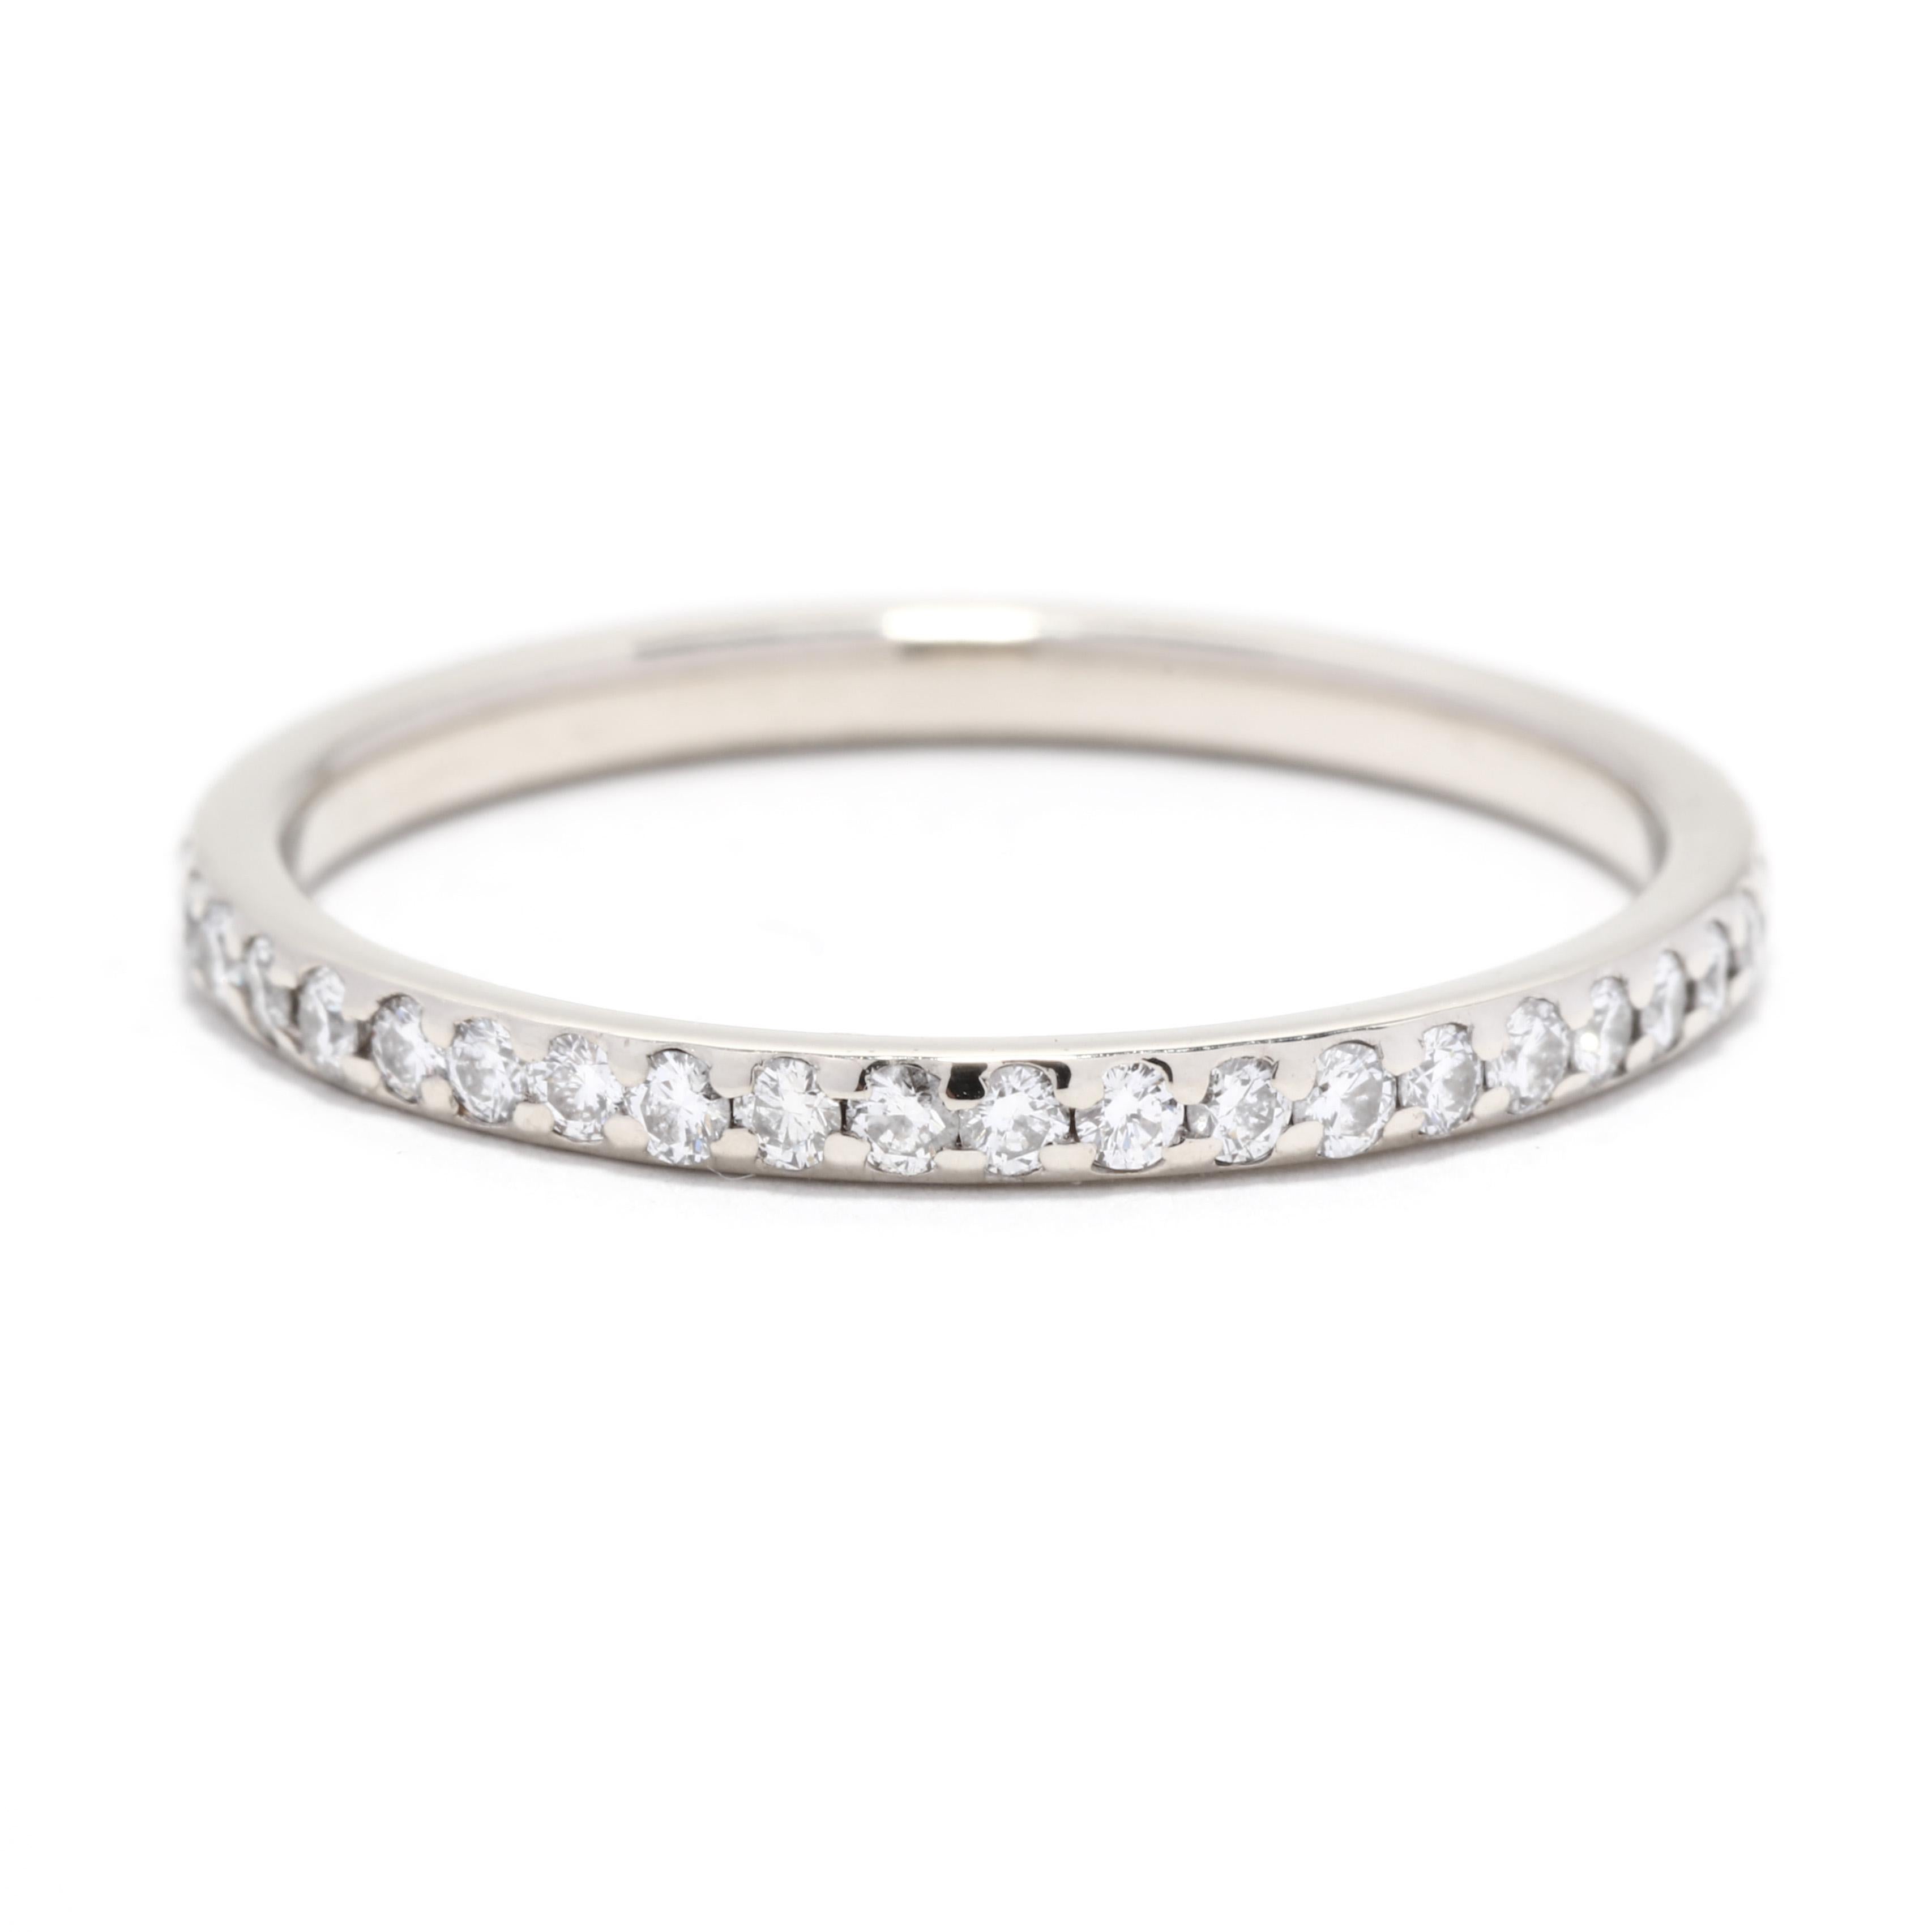 A vintage 18 karat white gold thin diamond eternity band. This stackable diamond band features an eternity design with flush set round brilliant cut diamonds weighing approximately .50 total carats.

Stones:
- diamonds, 44 stones
- round brilliant